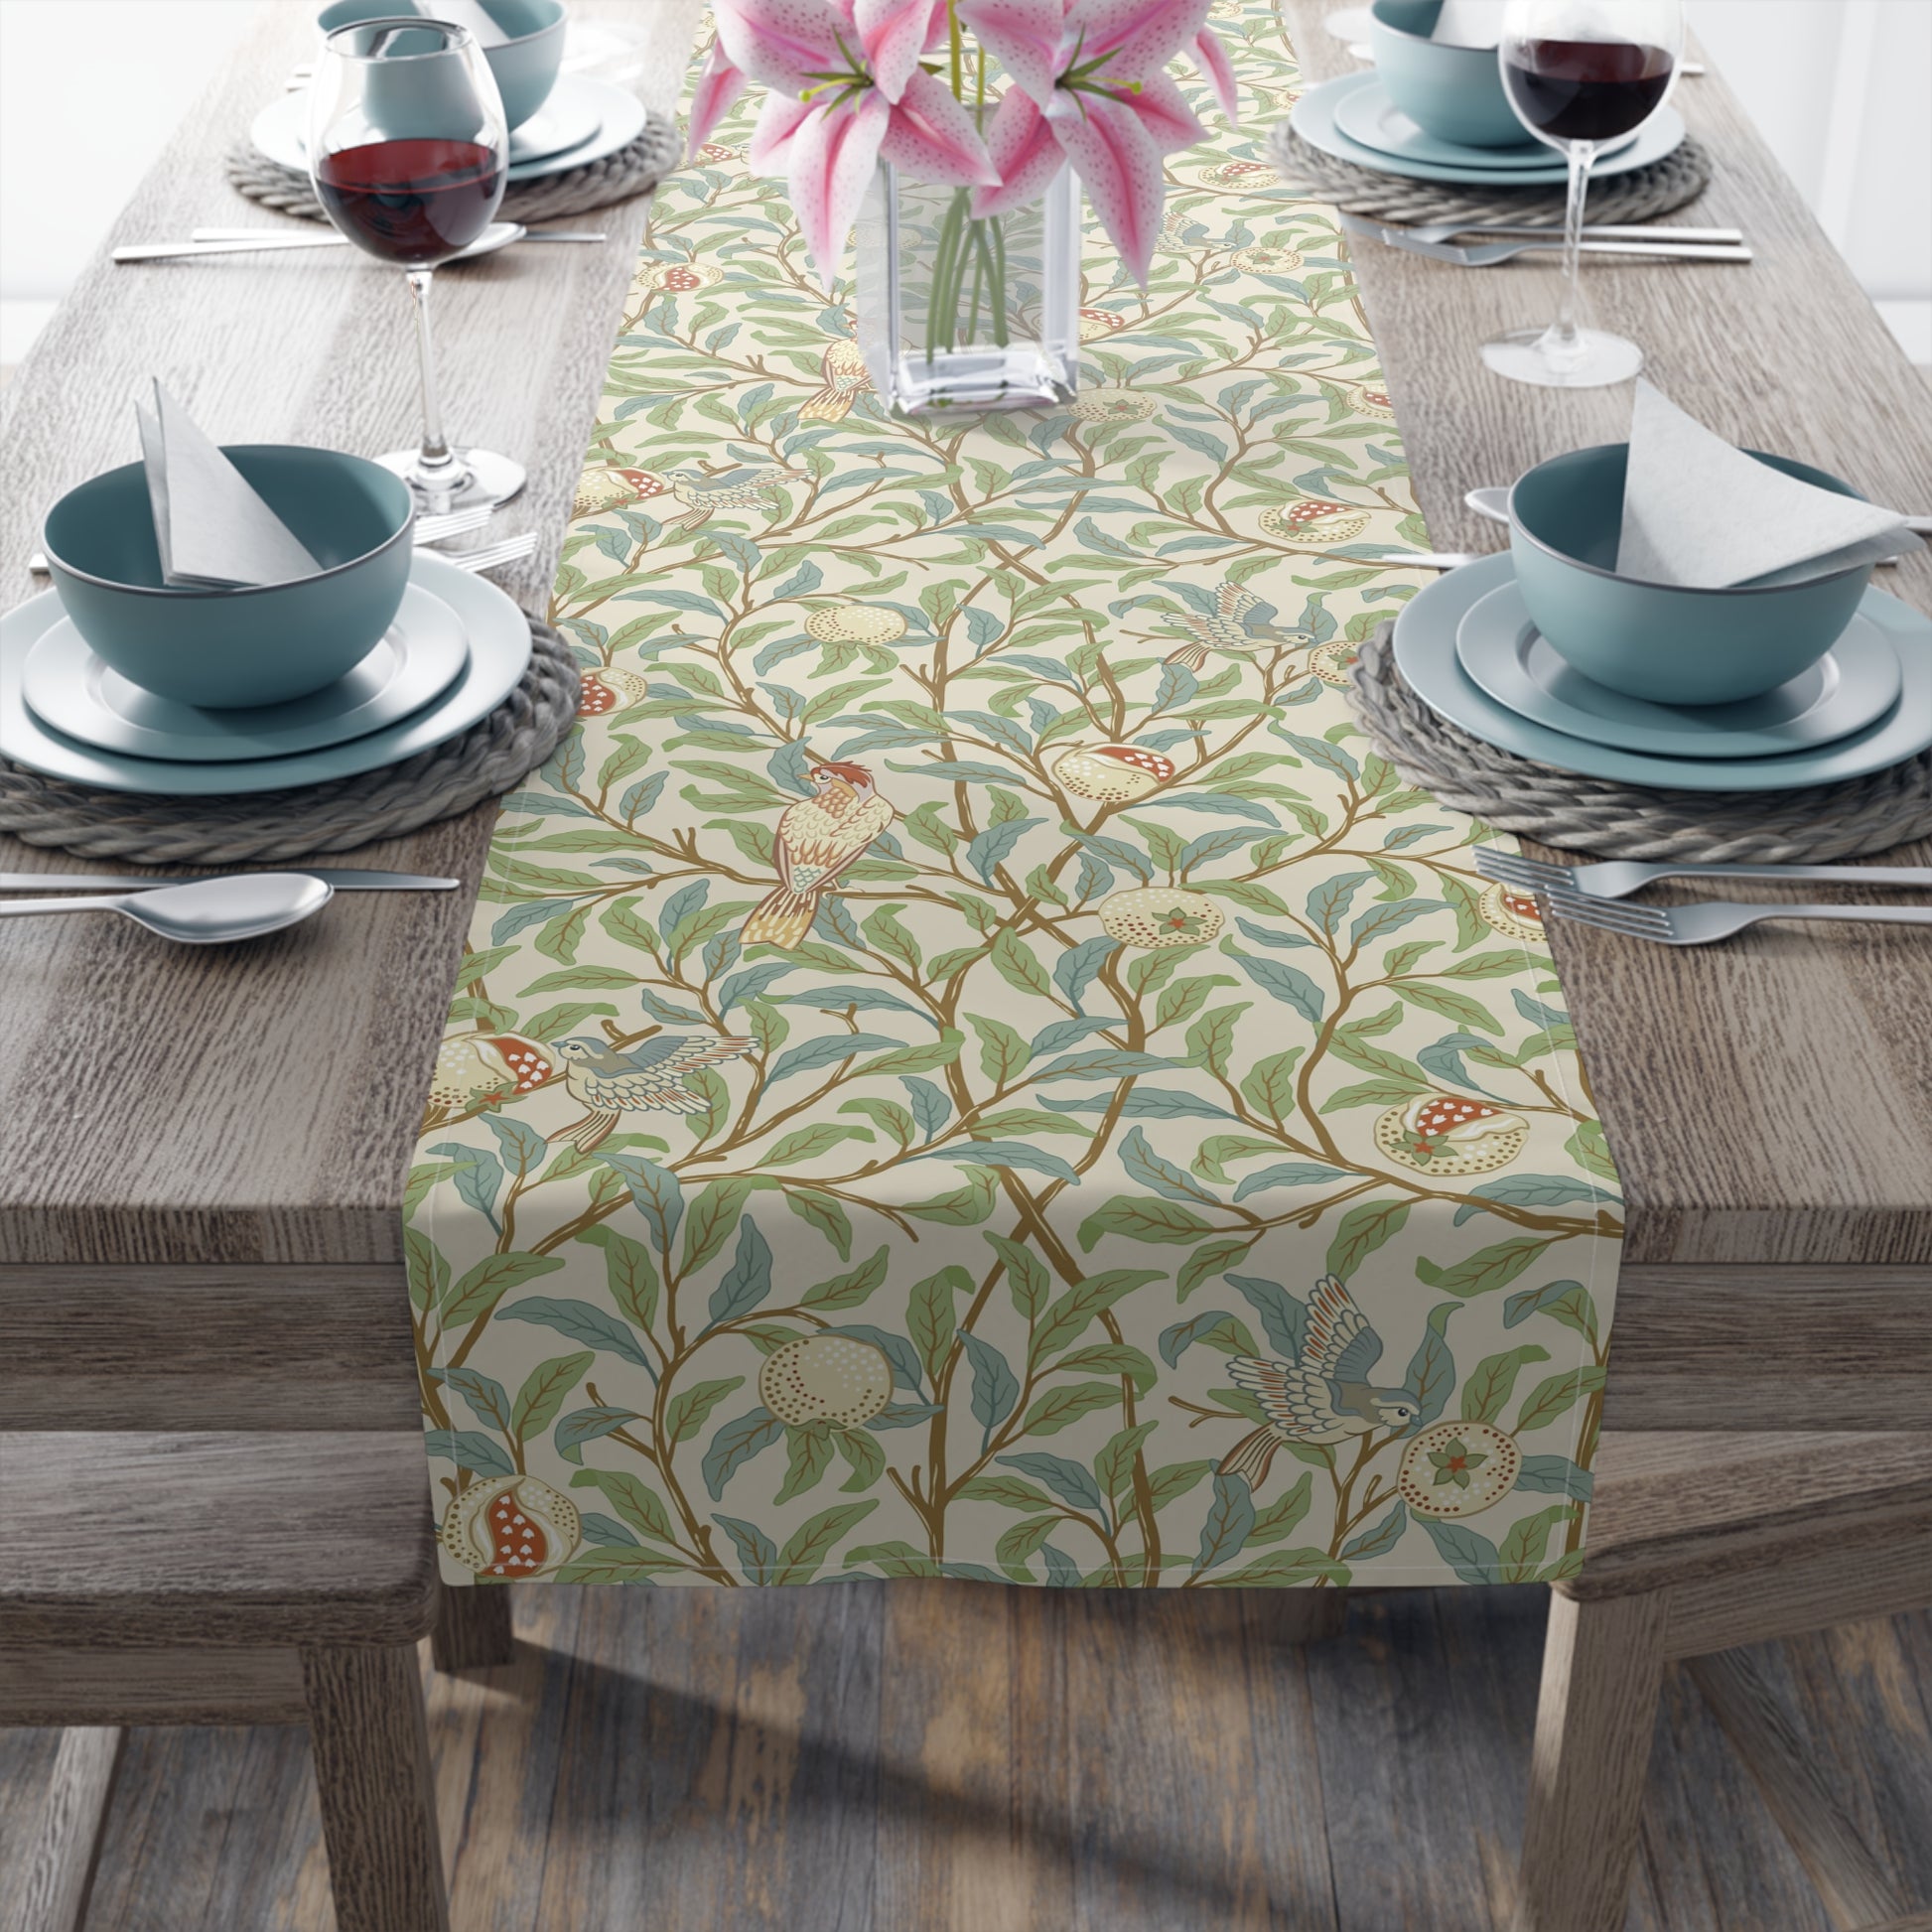 william-morris-co-table-runner-bird-and-pomegranate-collection-parchment-3